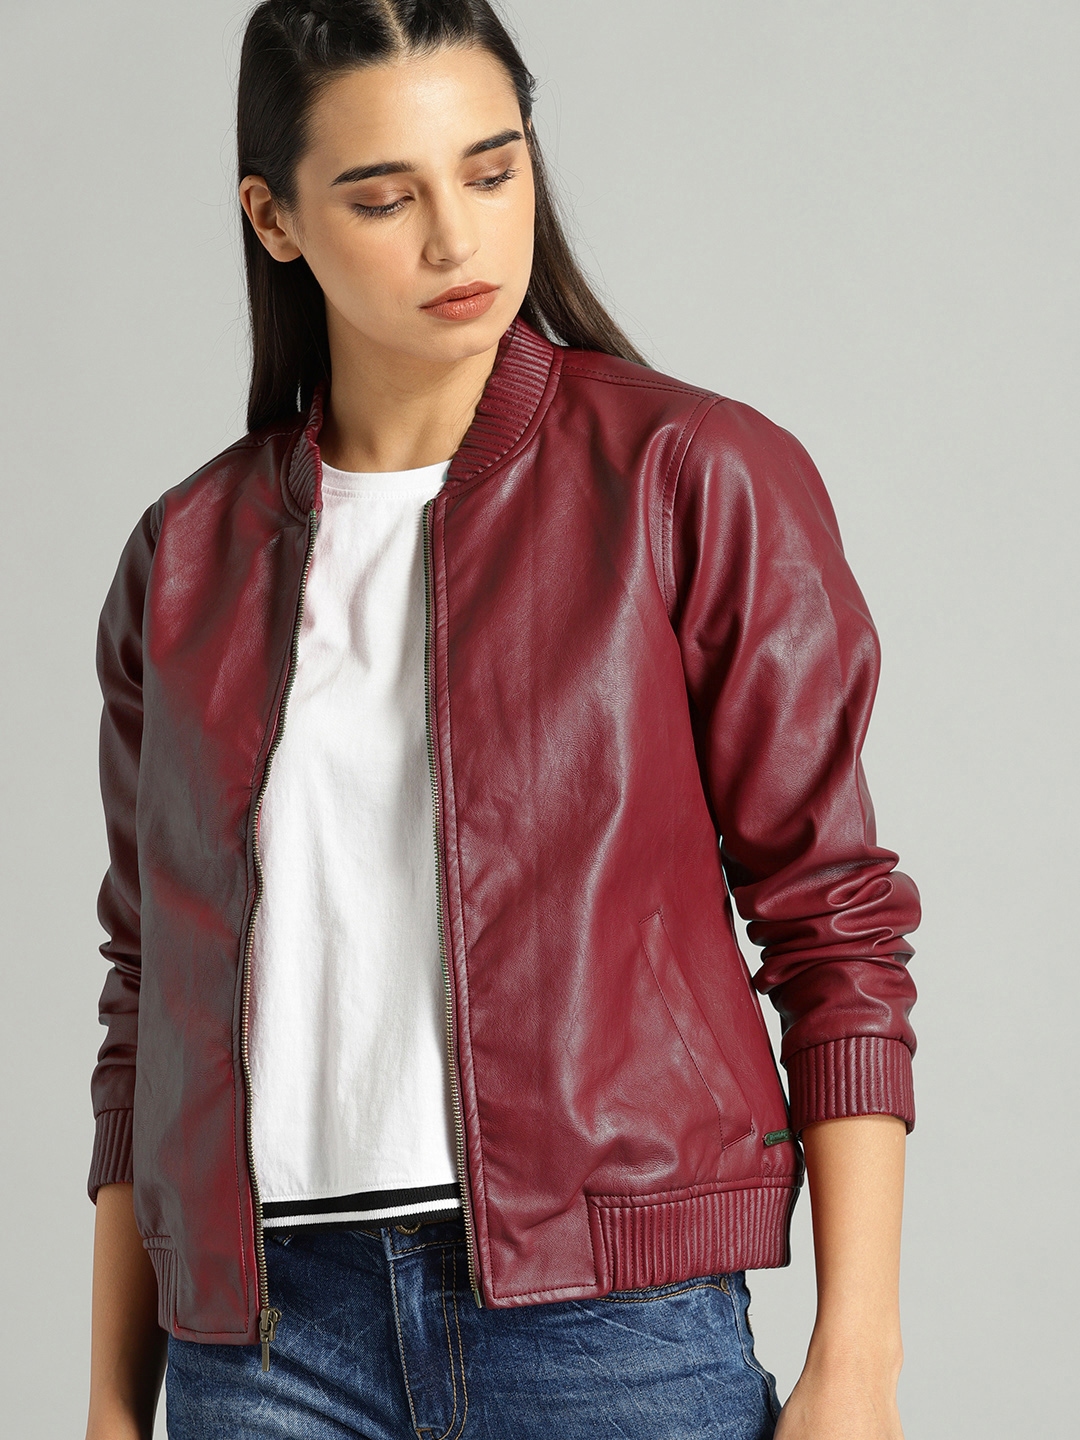 Buy The Roadster Lifestyle Co Women Maroon Solid Bomber Jacket ...